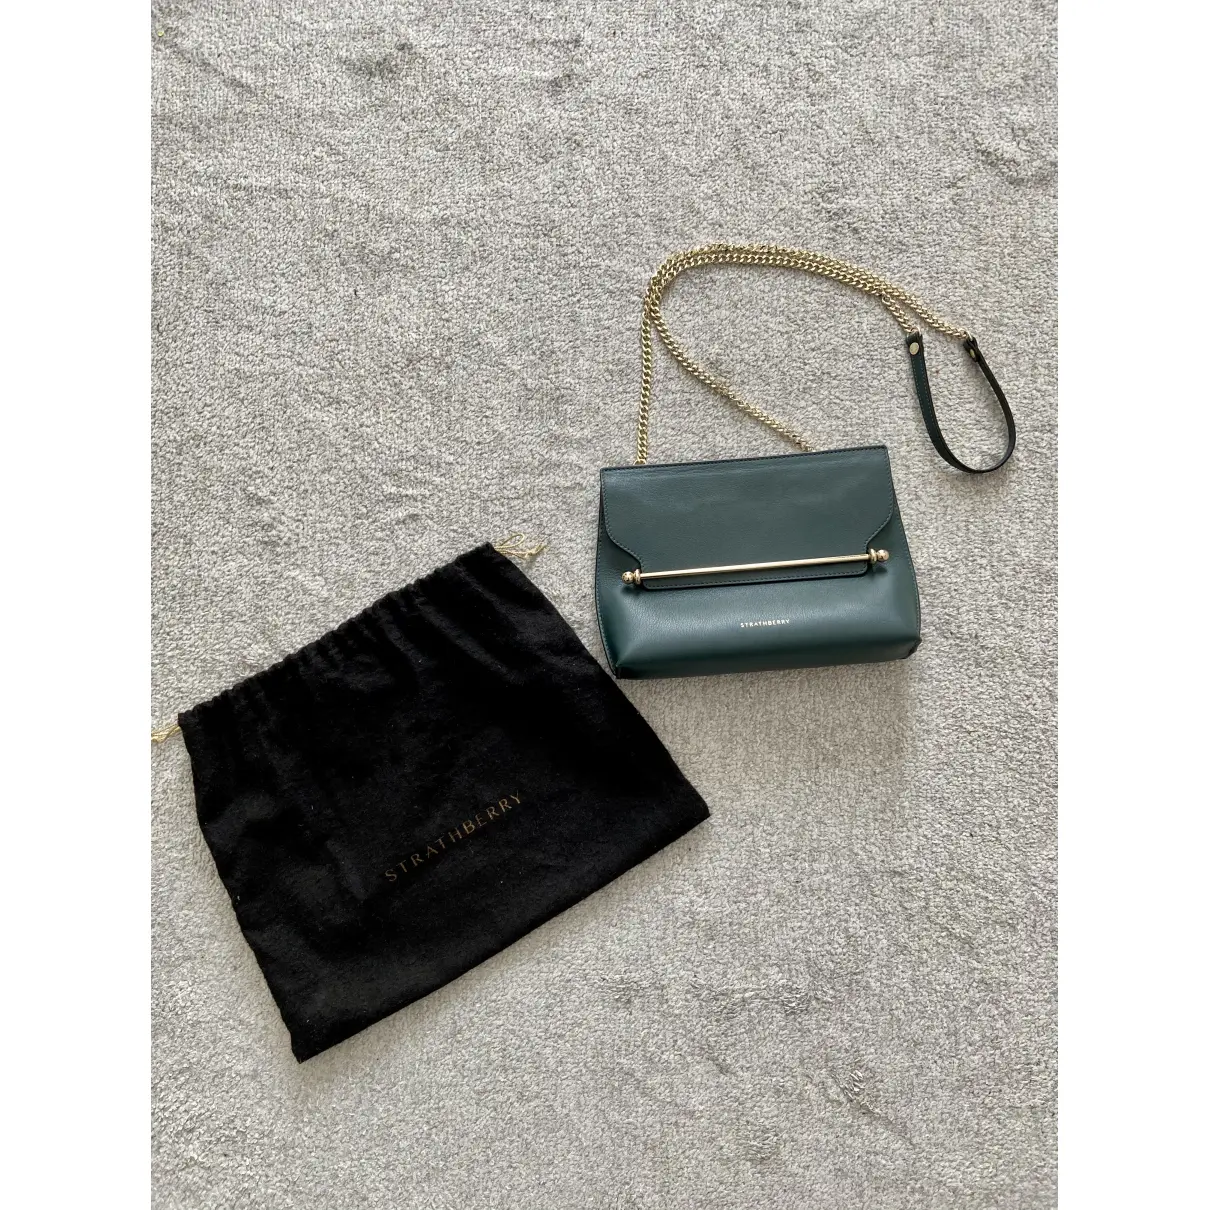 Buy Strathberry Leather crossbody bag online